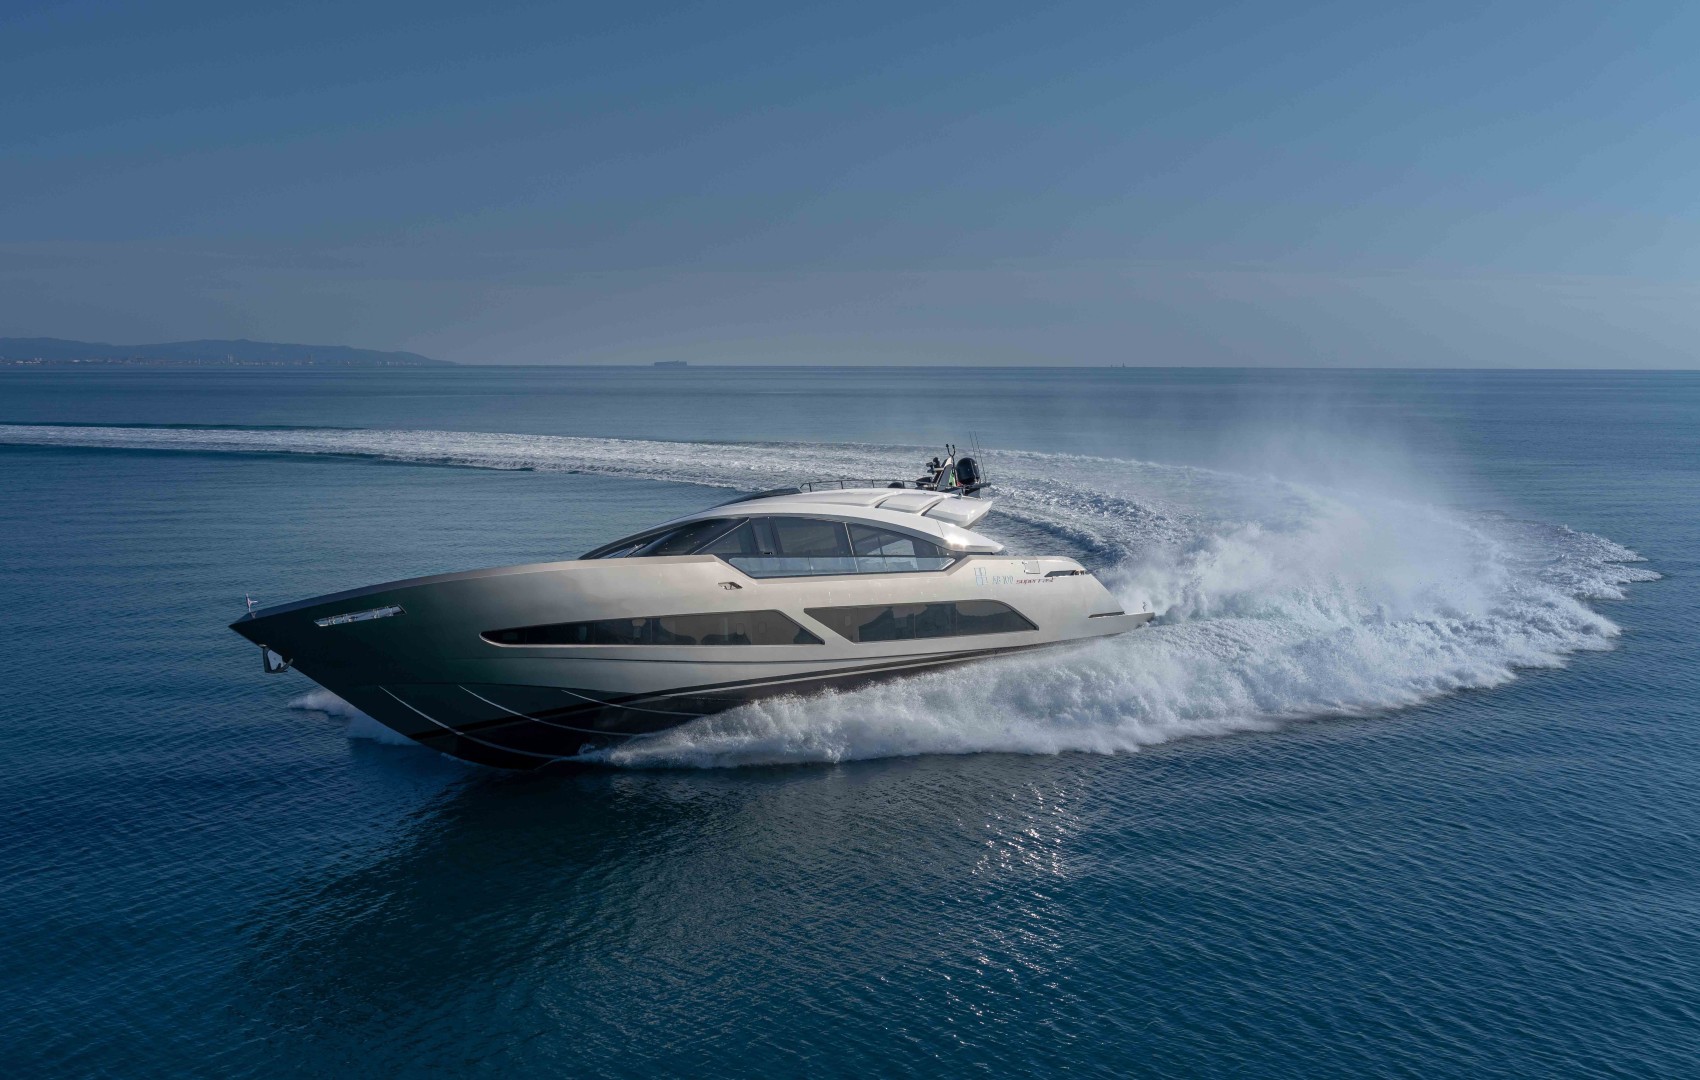 Next Yacht Grou, two more units in the AB 100 range were sold